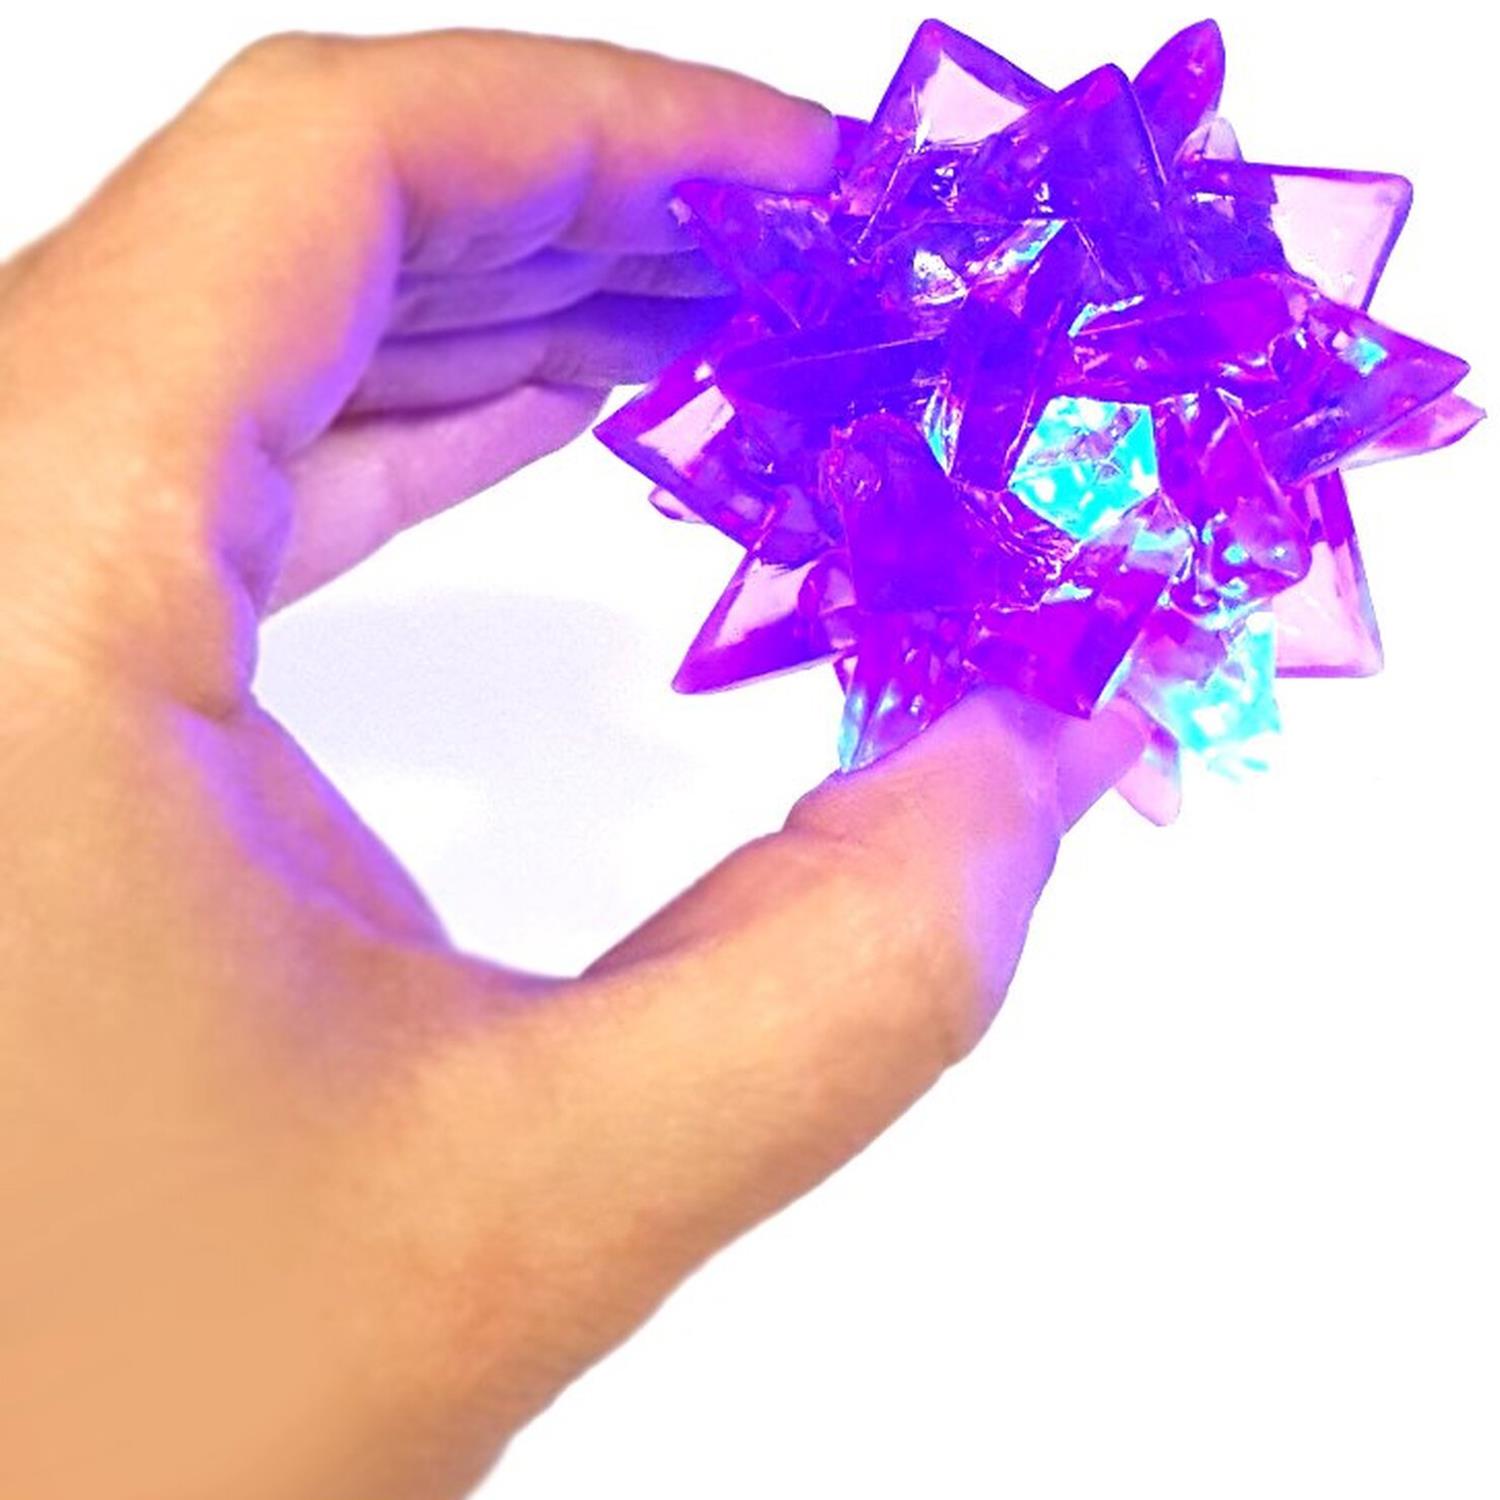 Flashing Crystal Bouncy Ball by The Magic Toy Shop - UKBuyZone